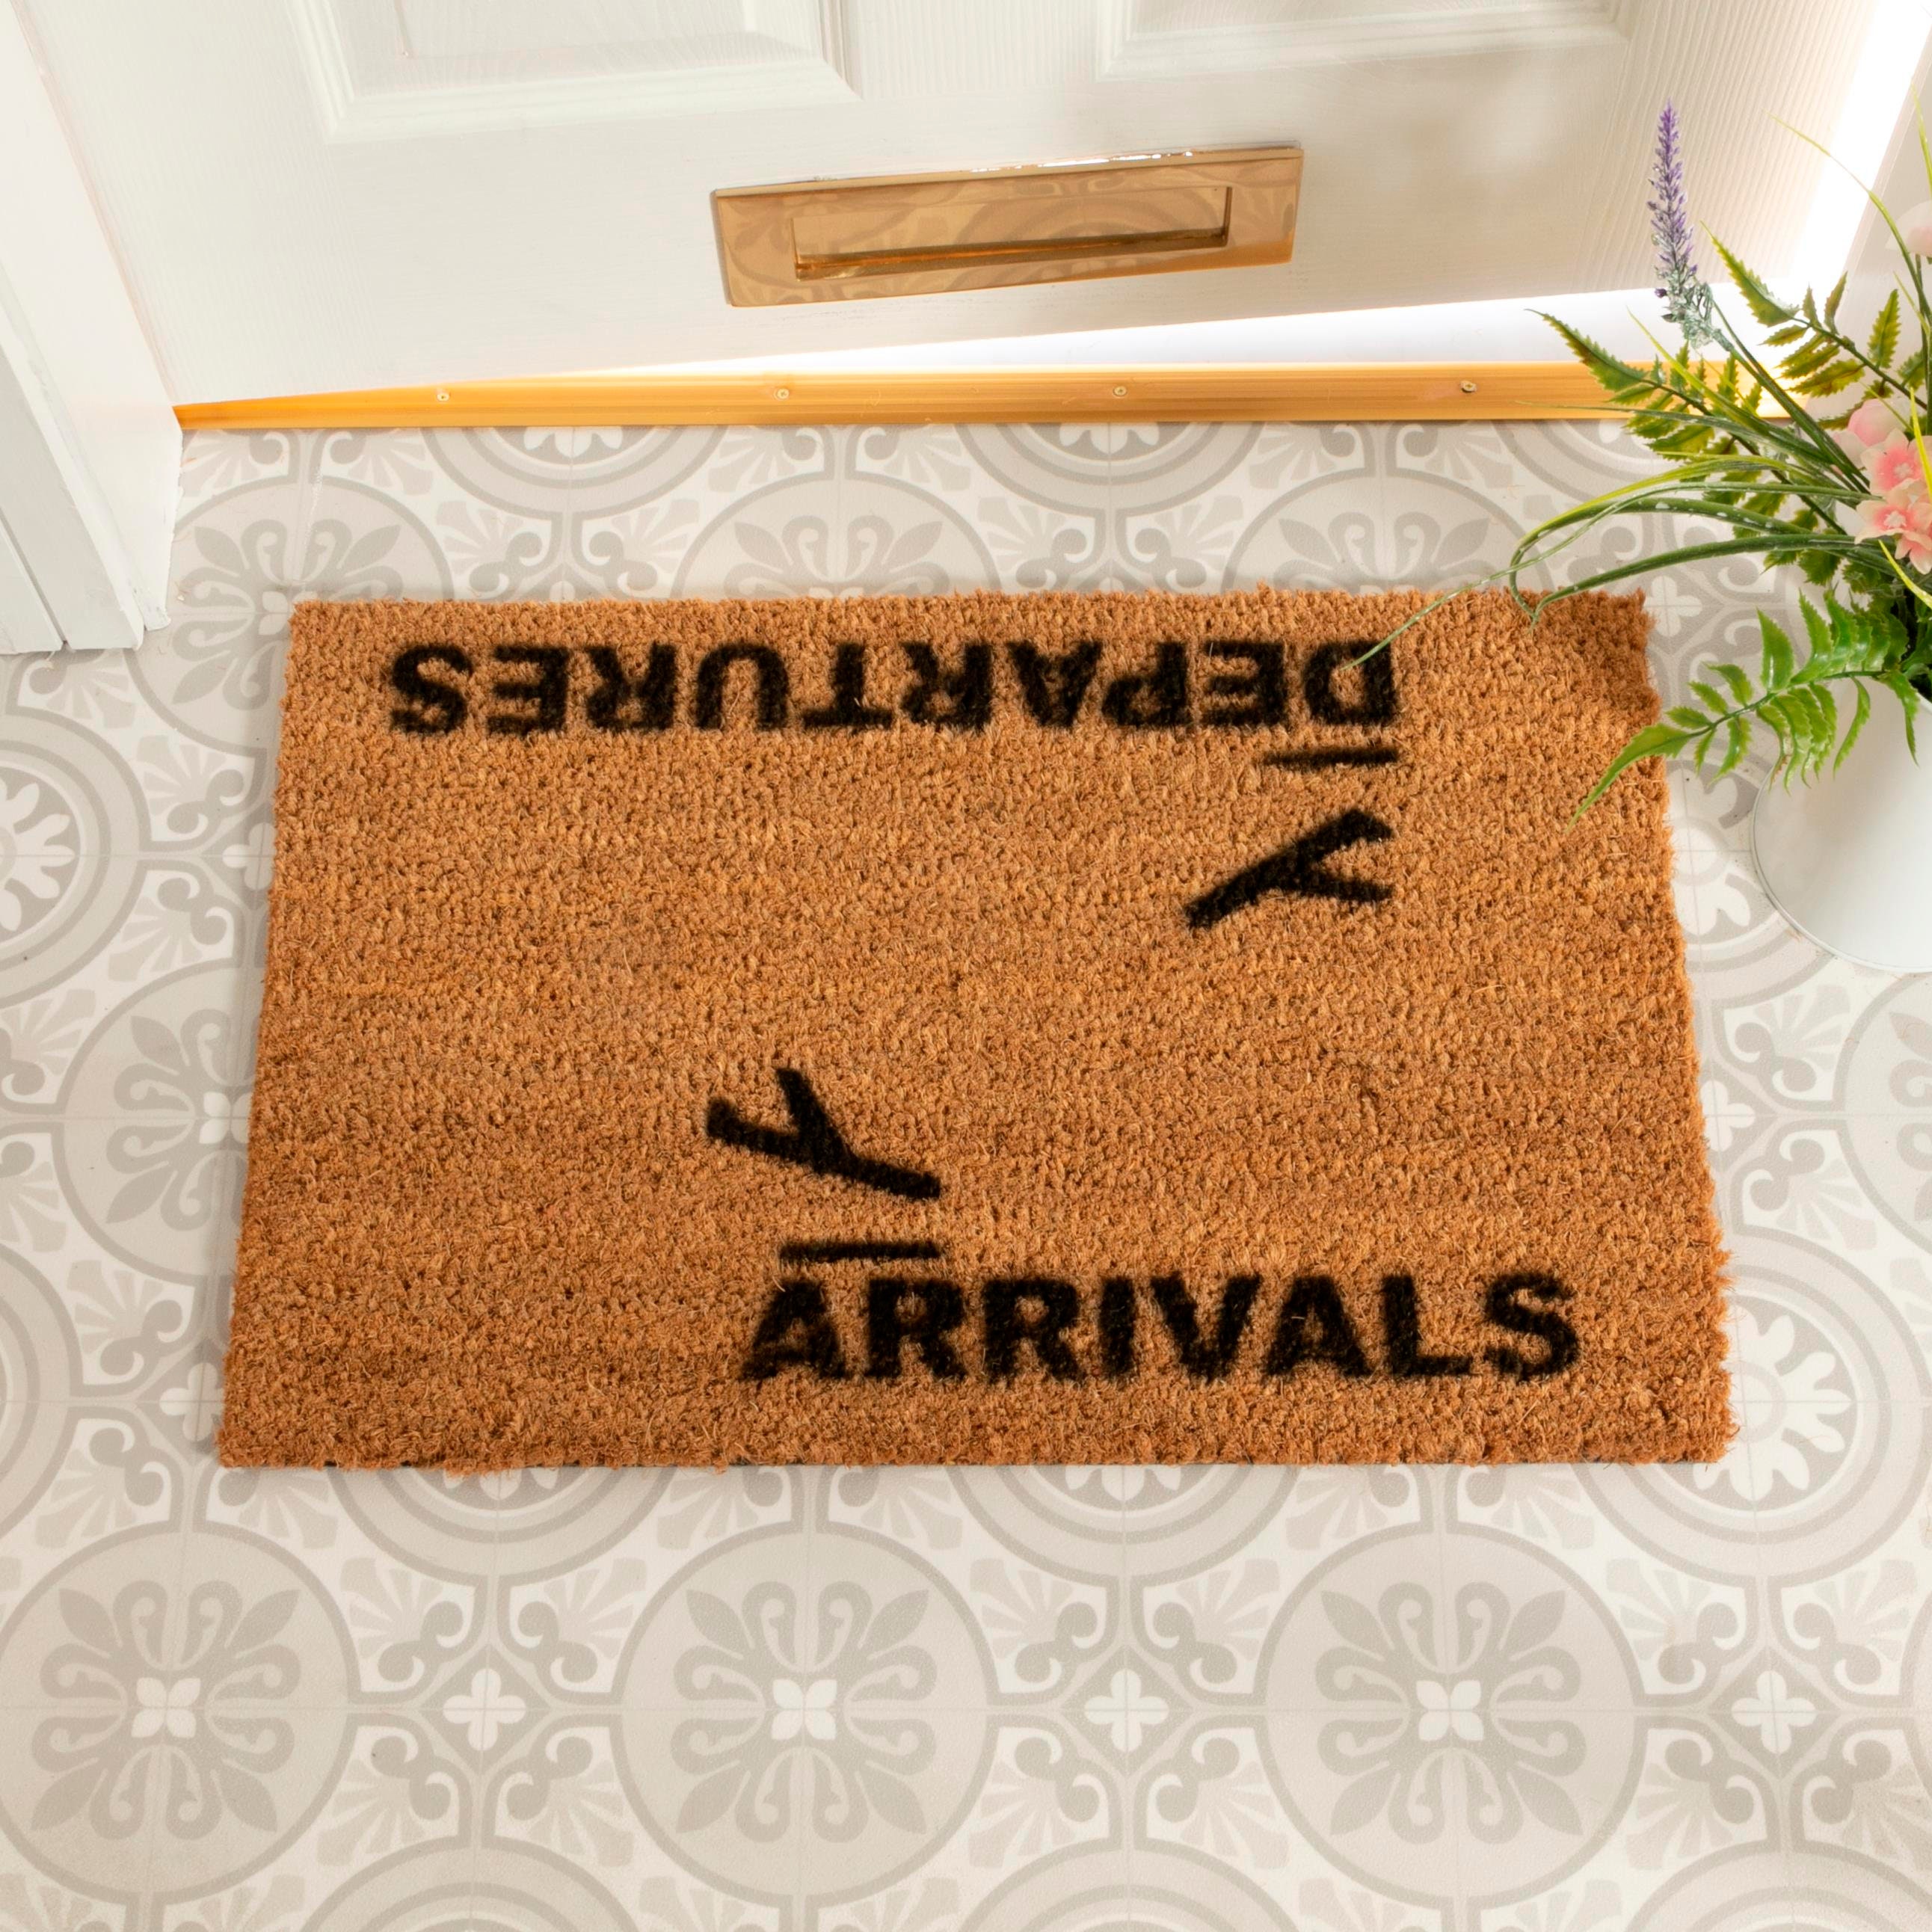 The best doormats, according to experts - The Washington Post